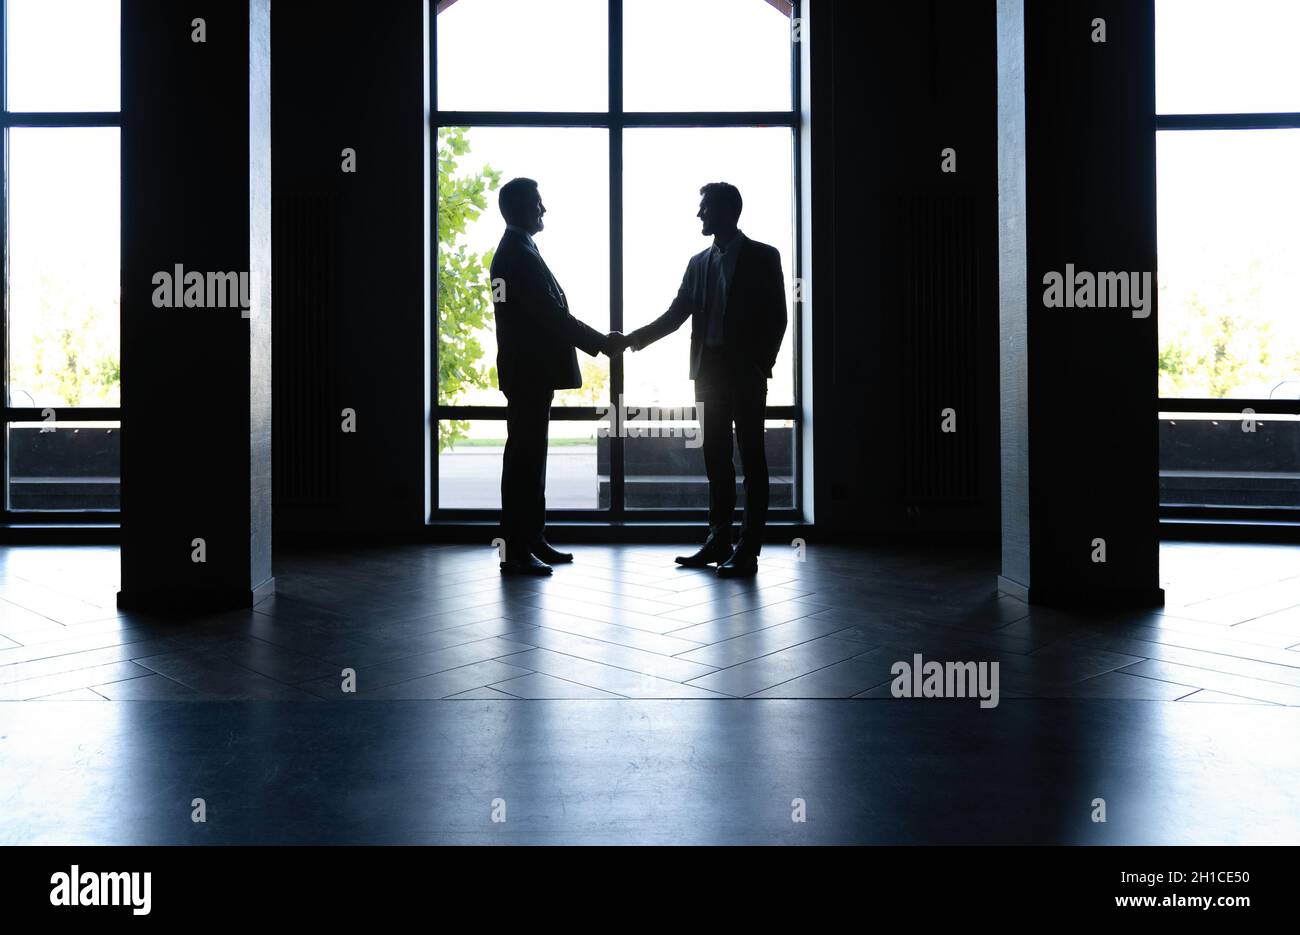 Full length view of businessmen shaking hands in office building. Stock Photo